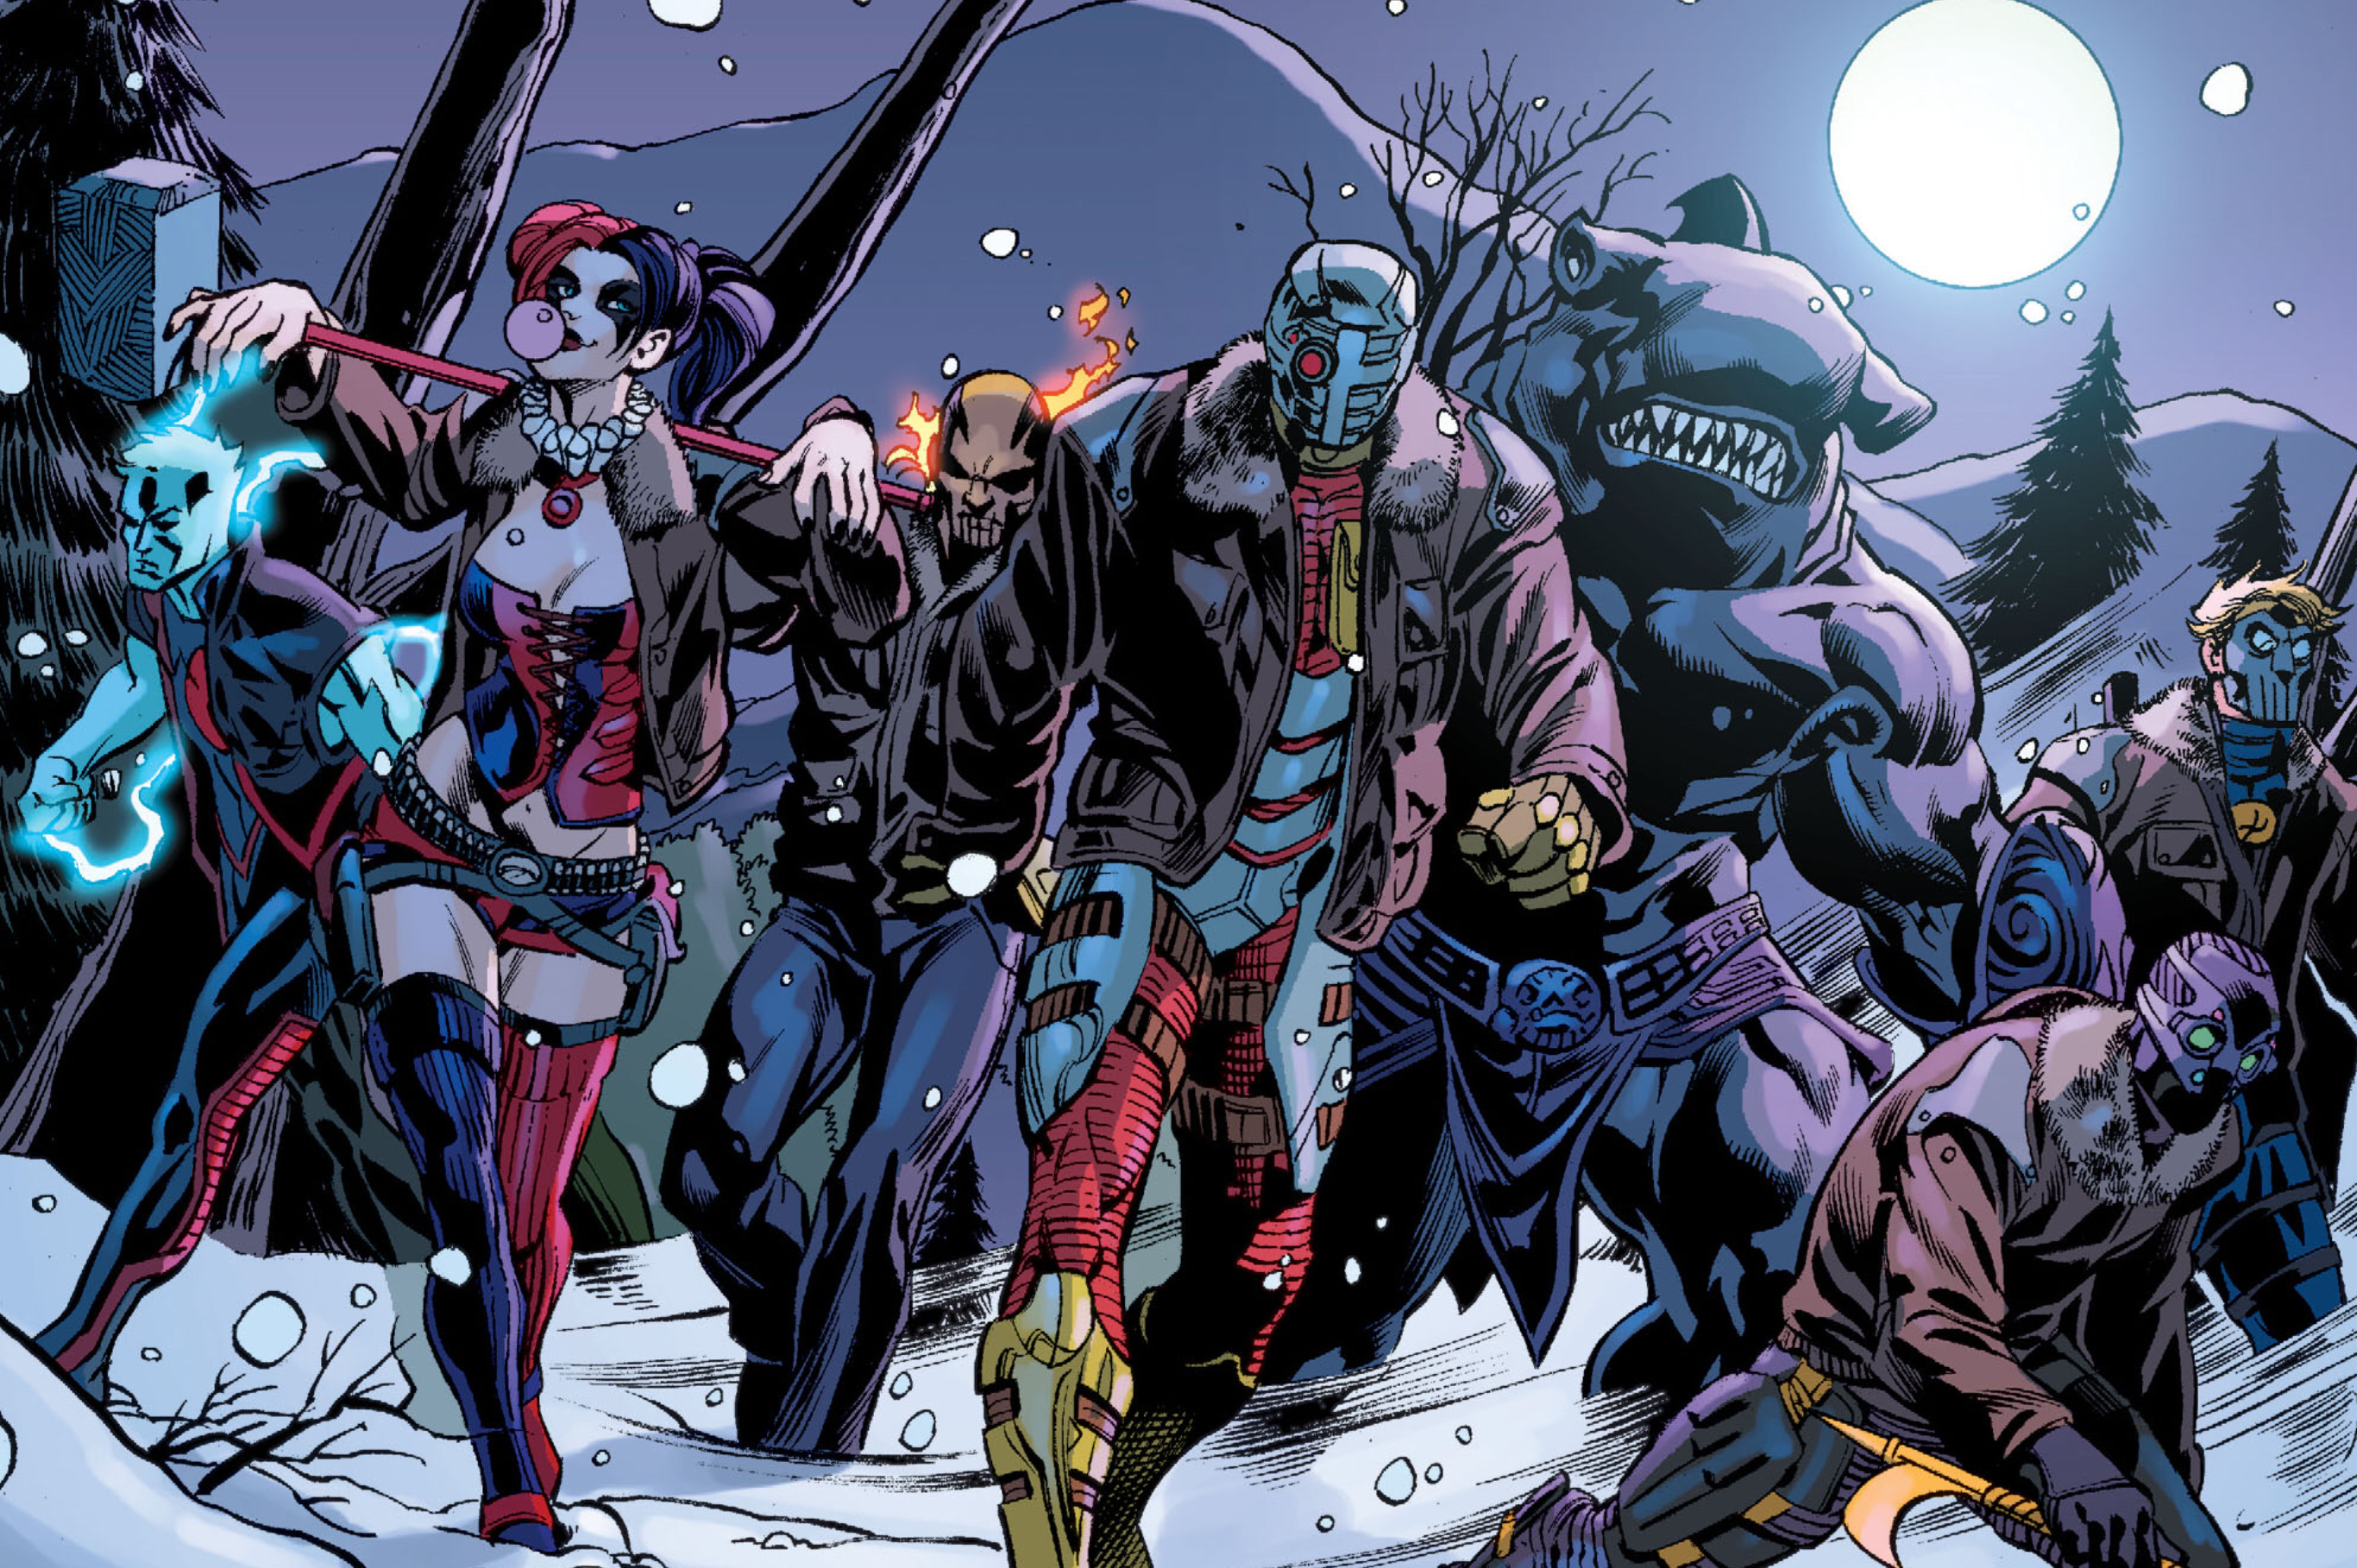 Harley Quinn, Diablo, Deadshot, King Shark and other supervillains march through the snow in Suicide Squad #1 (2011).